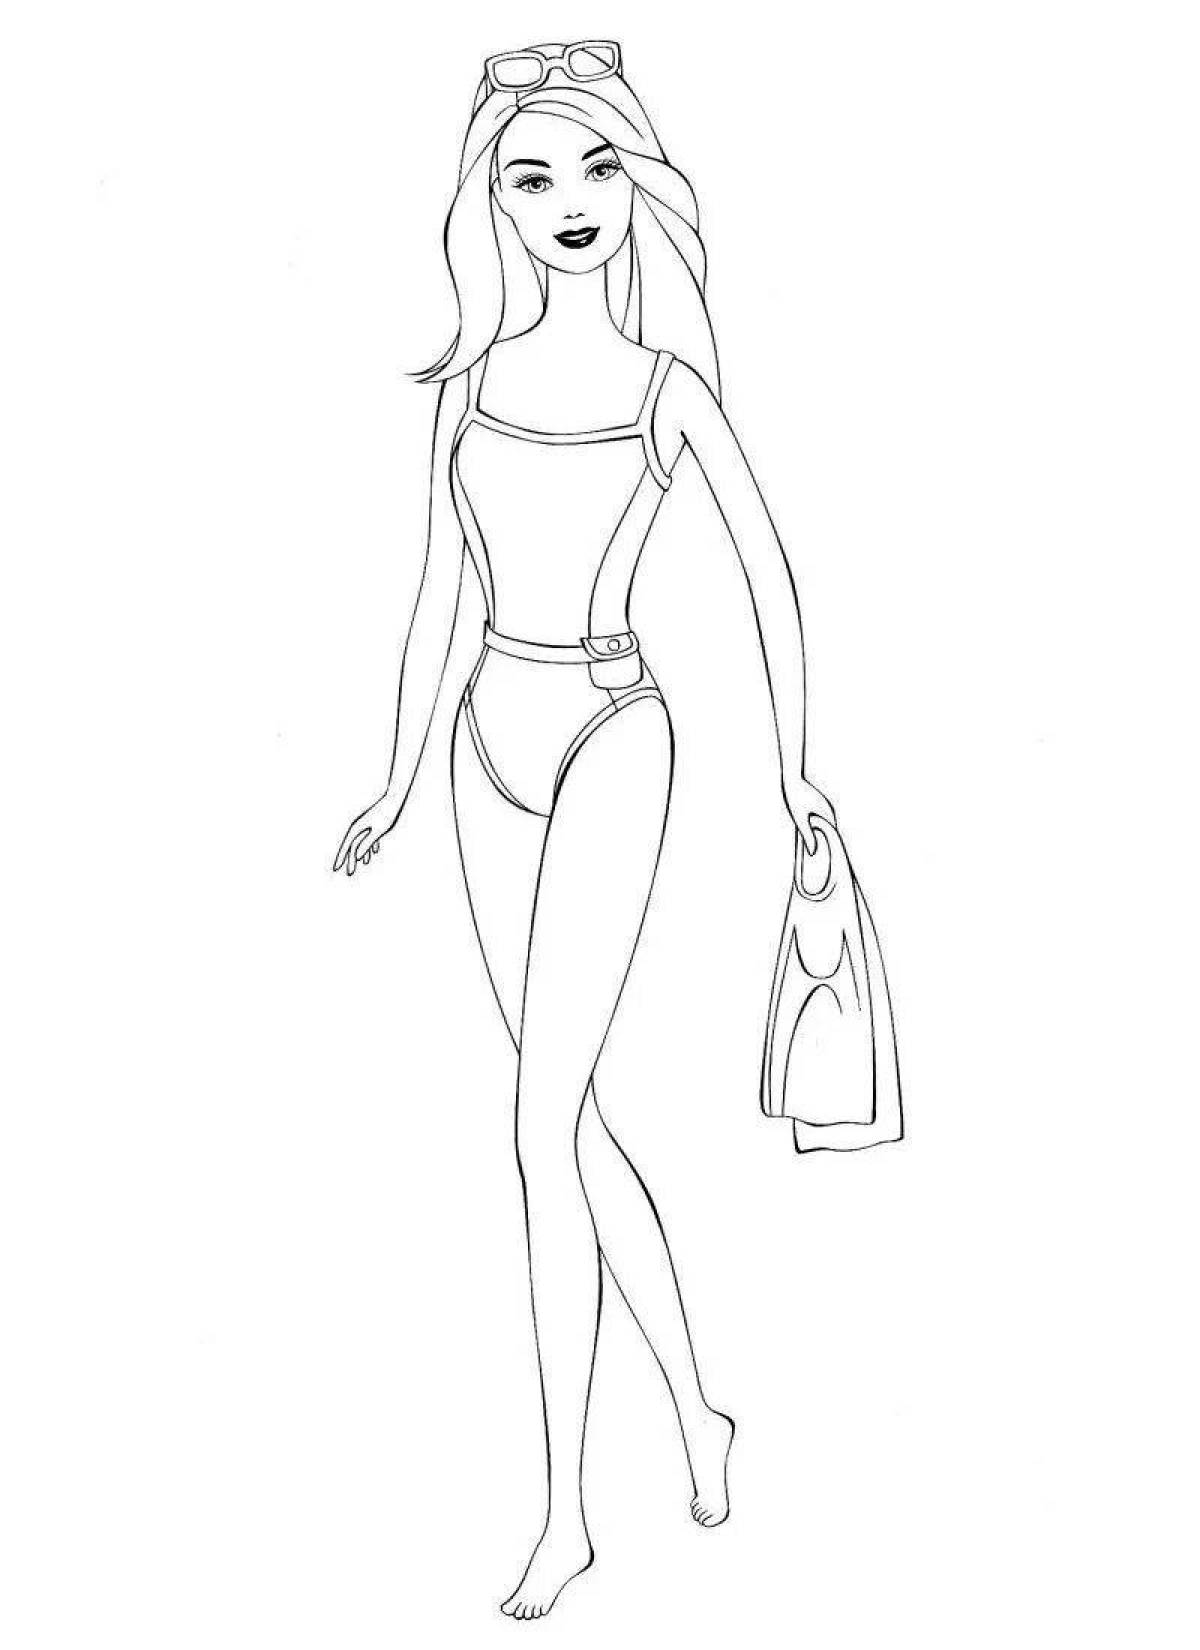 Coloring book shining doll in a bathing suit